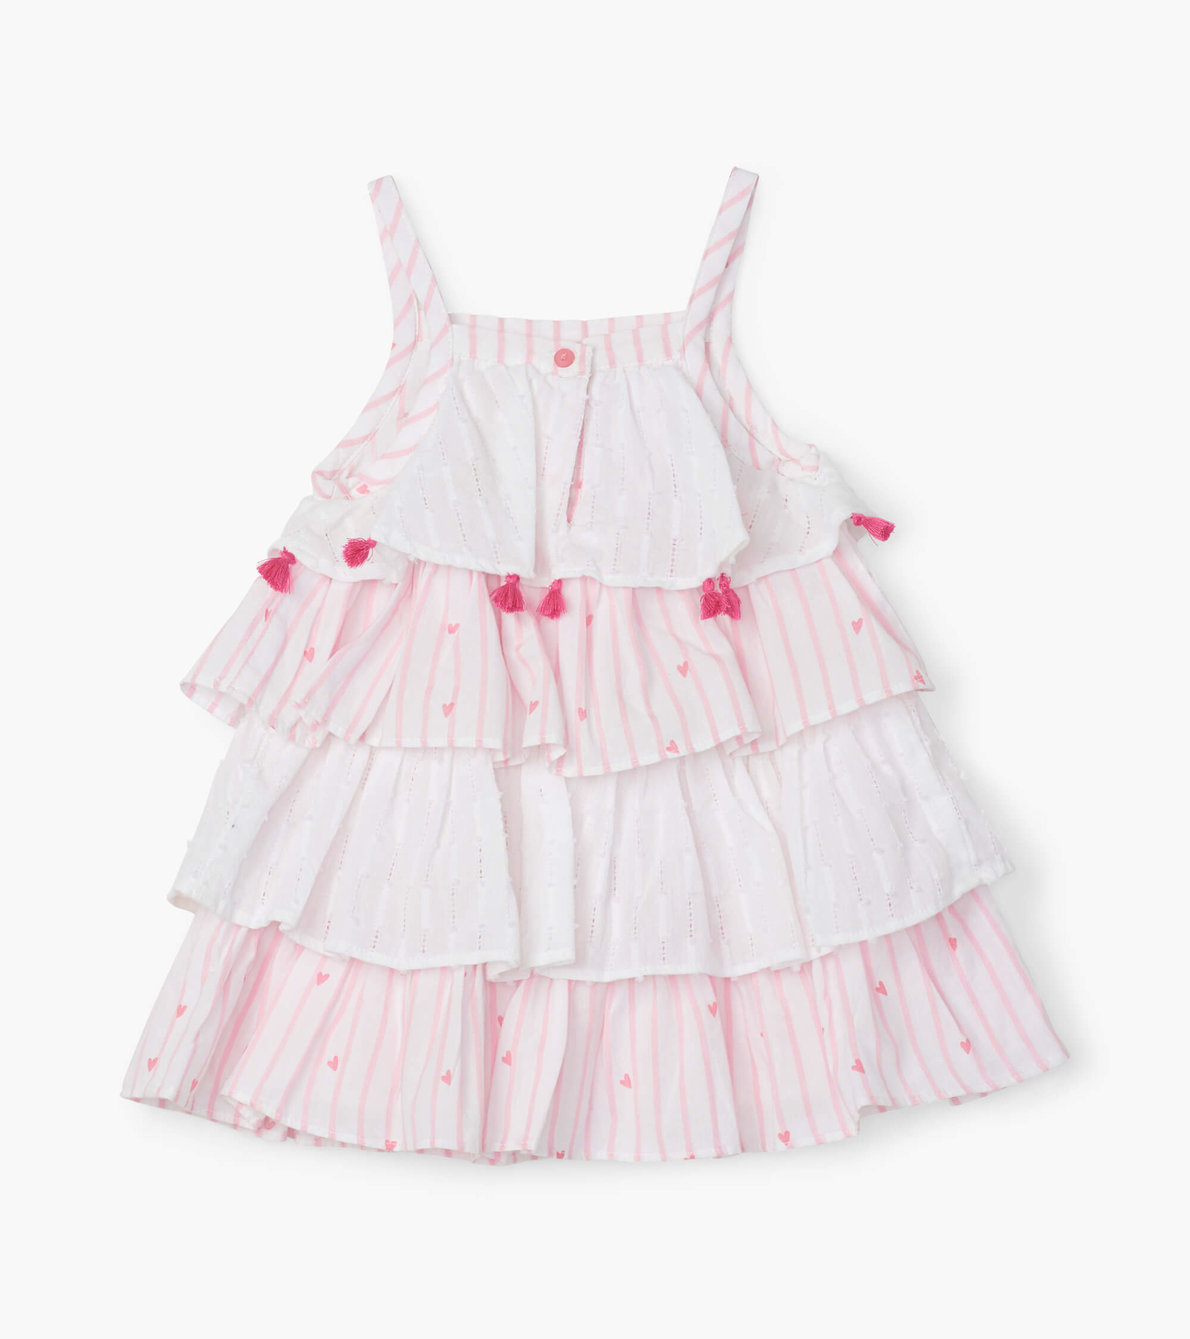 View larger image of Scattered Hearts Baby Layered Dress